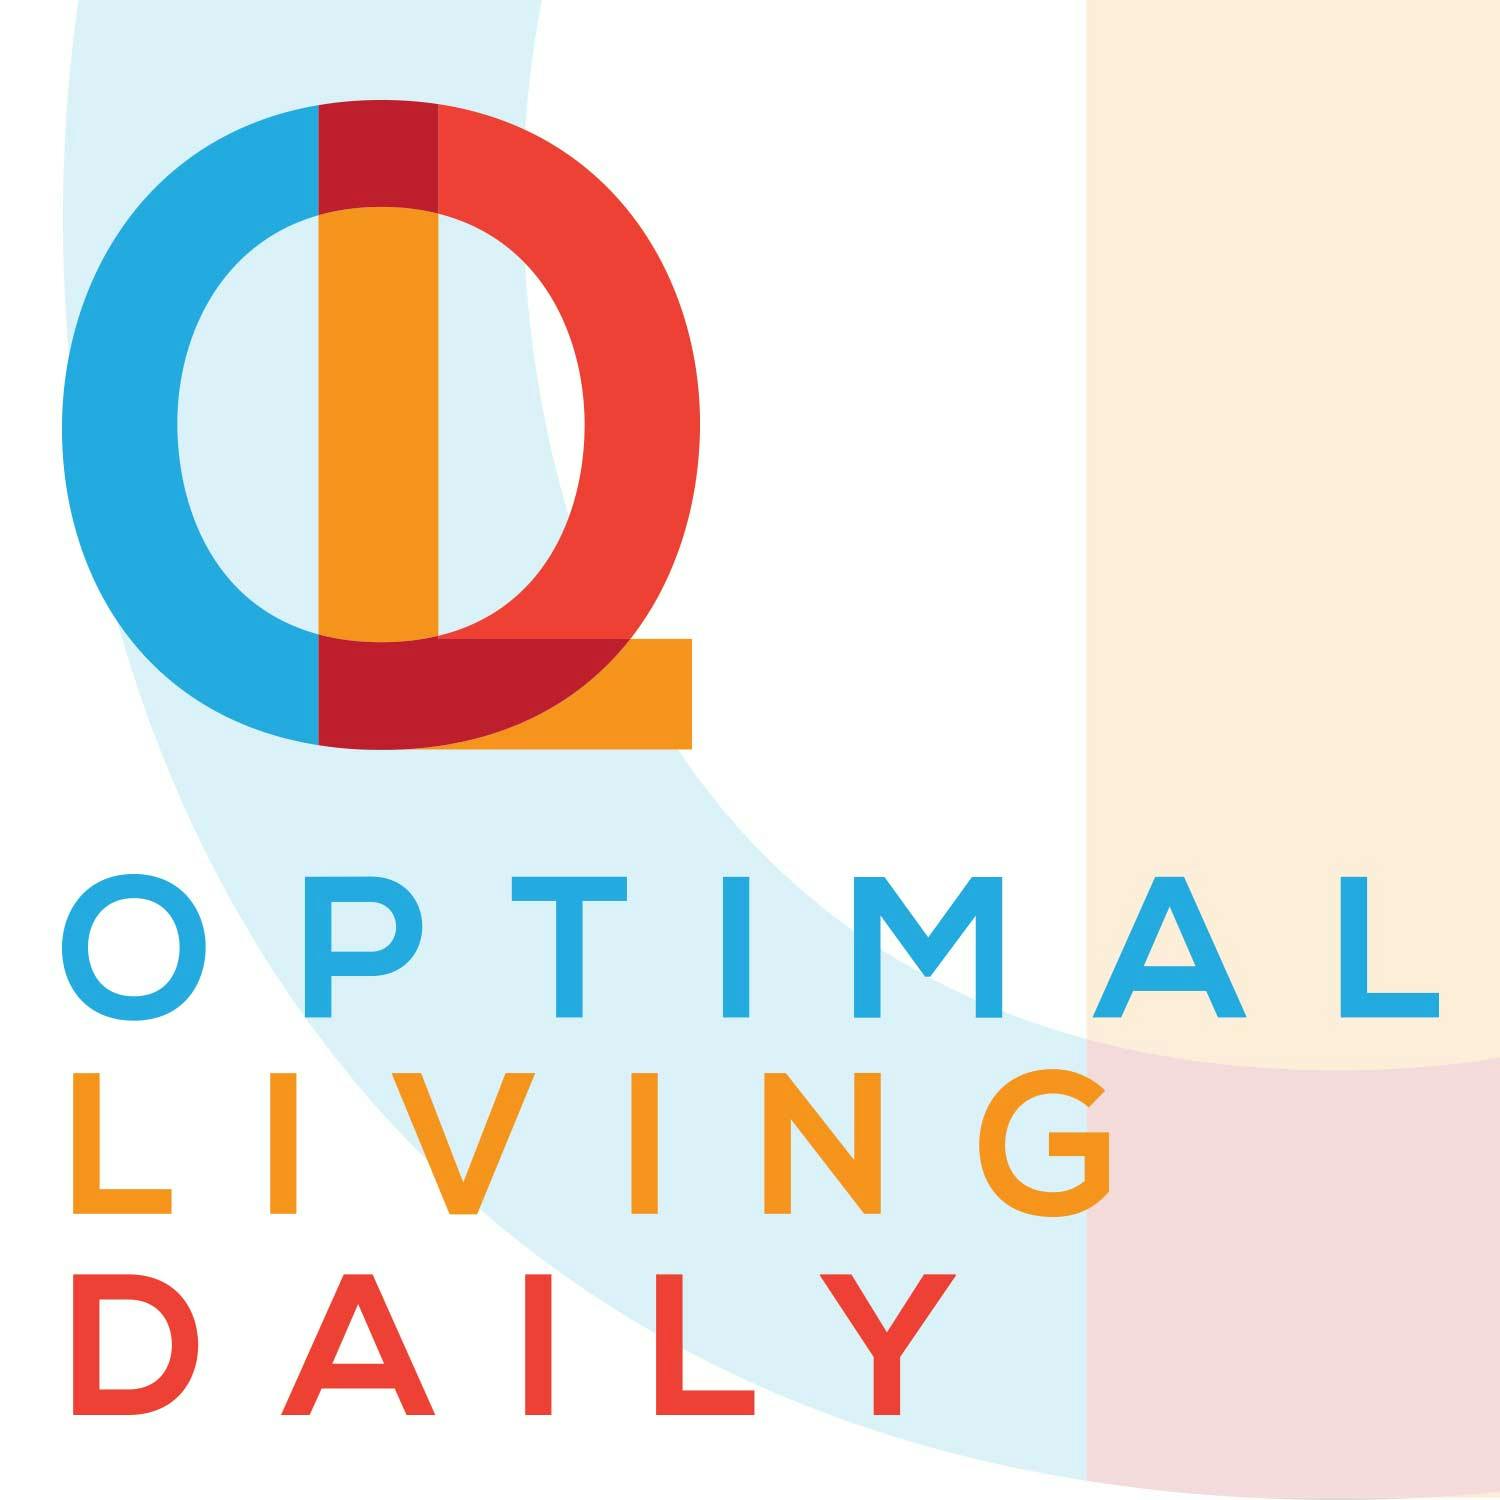 1950: How Cyclical Thinking Can Help You Live Better by Cylon George of Spiritual Living For Busy People